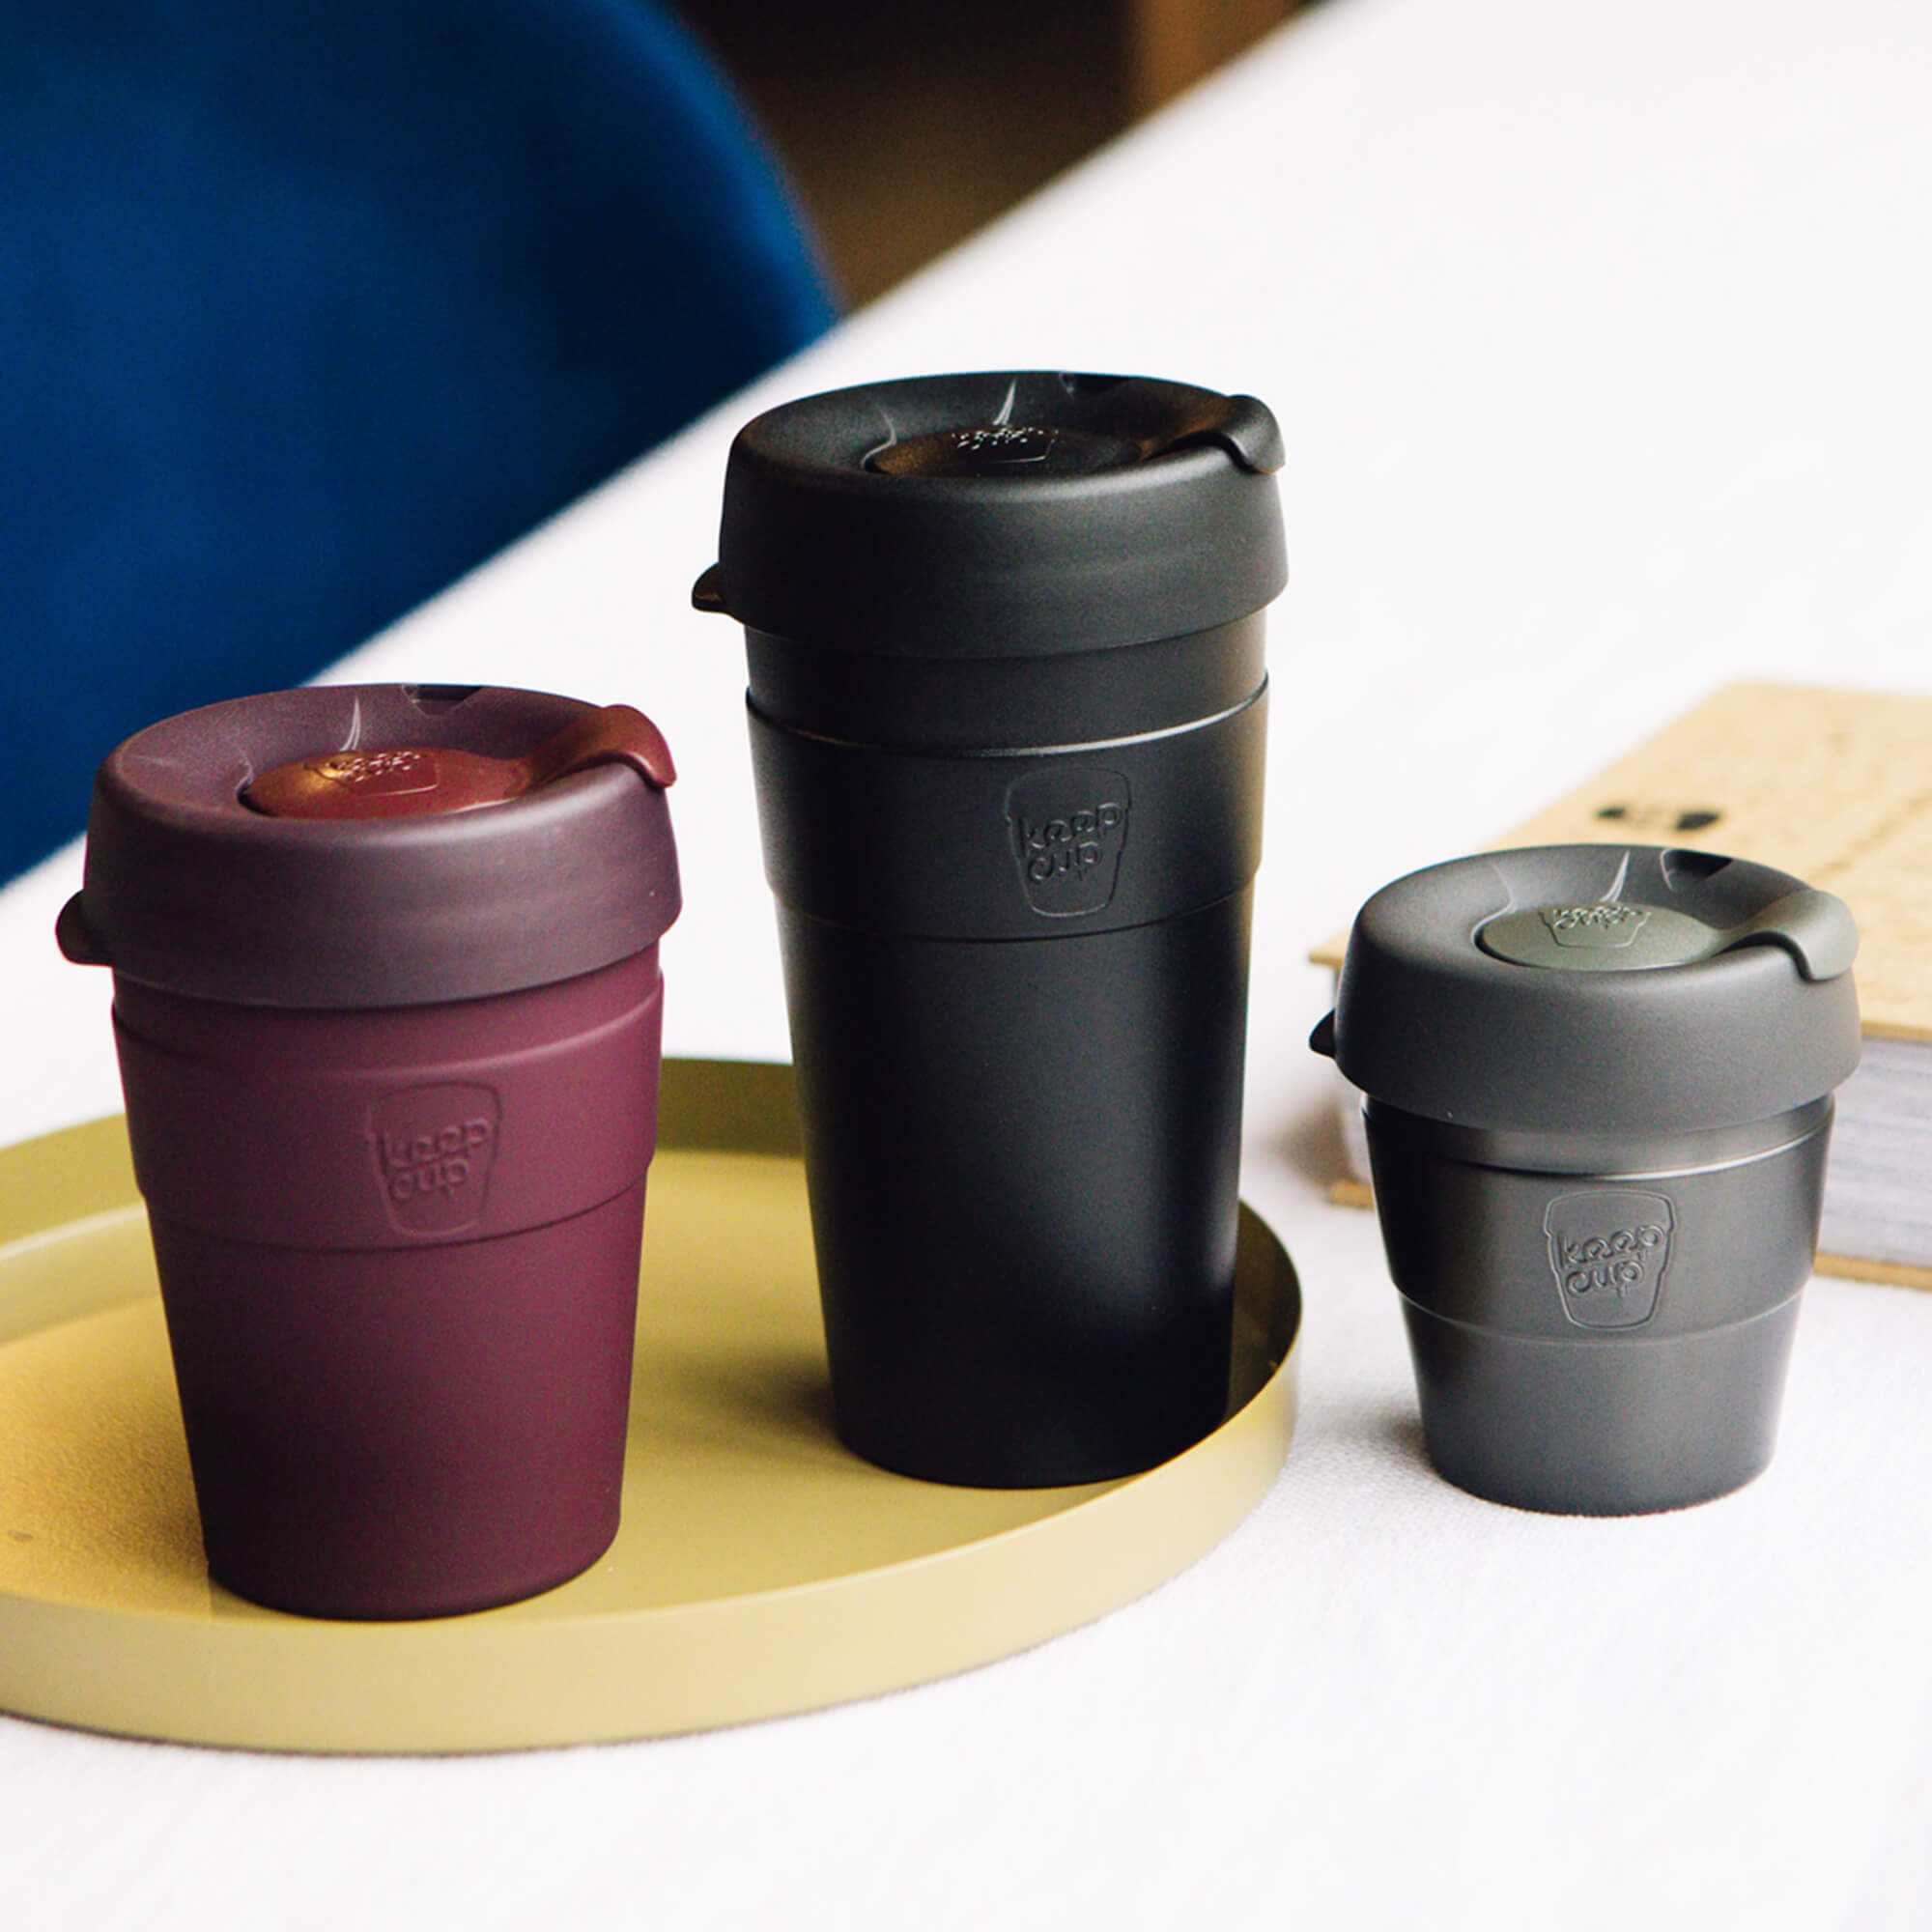 KeepCup Thermal Insulated 454ml Reusable Tea/Coffee Cup